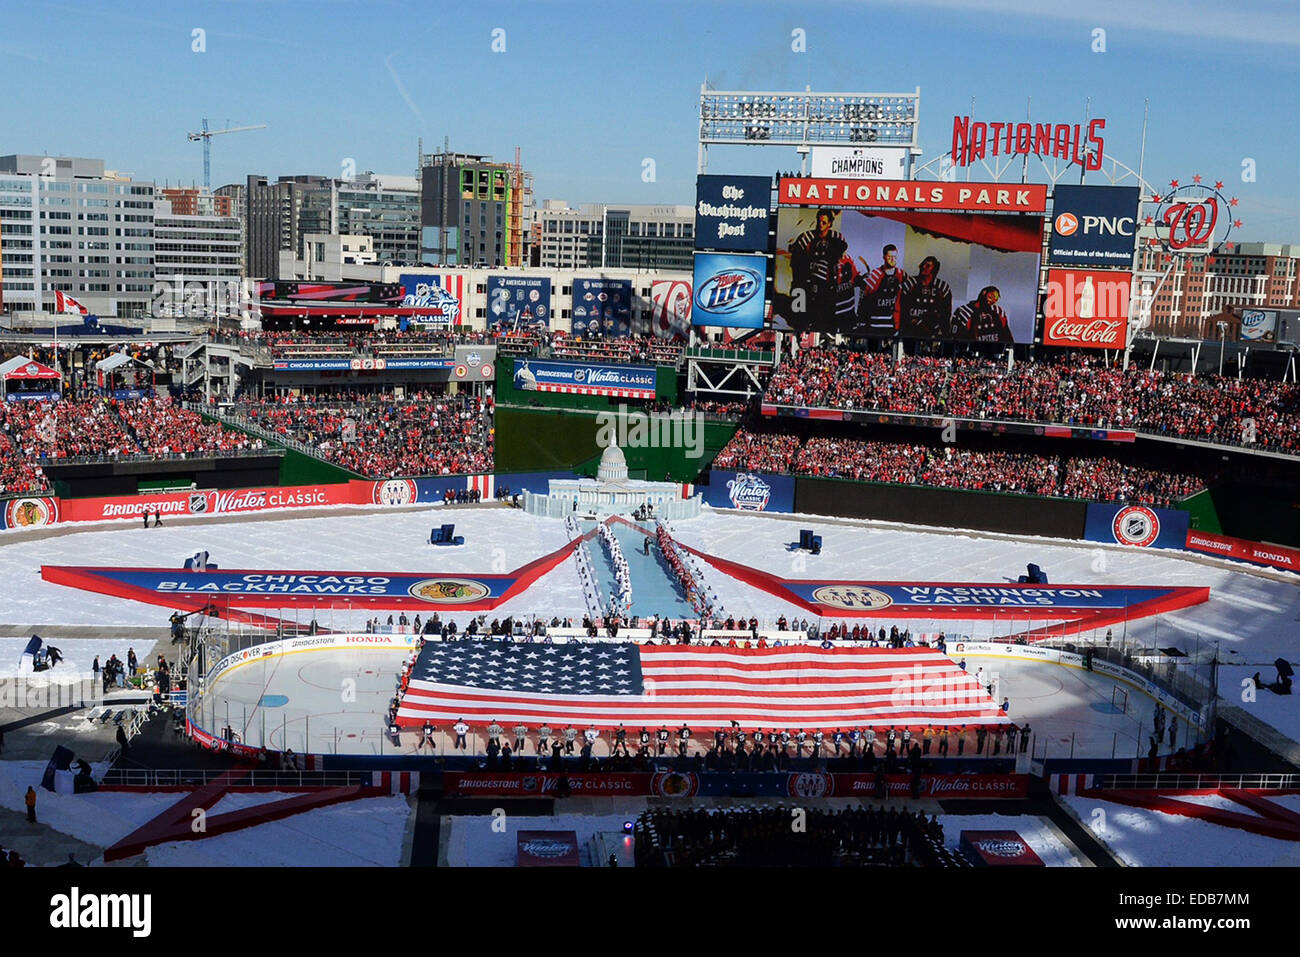 Check out some of the best pictures from the Winter Classic